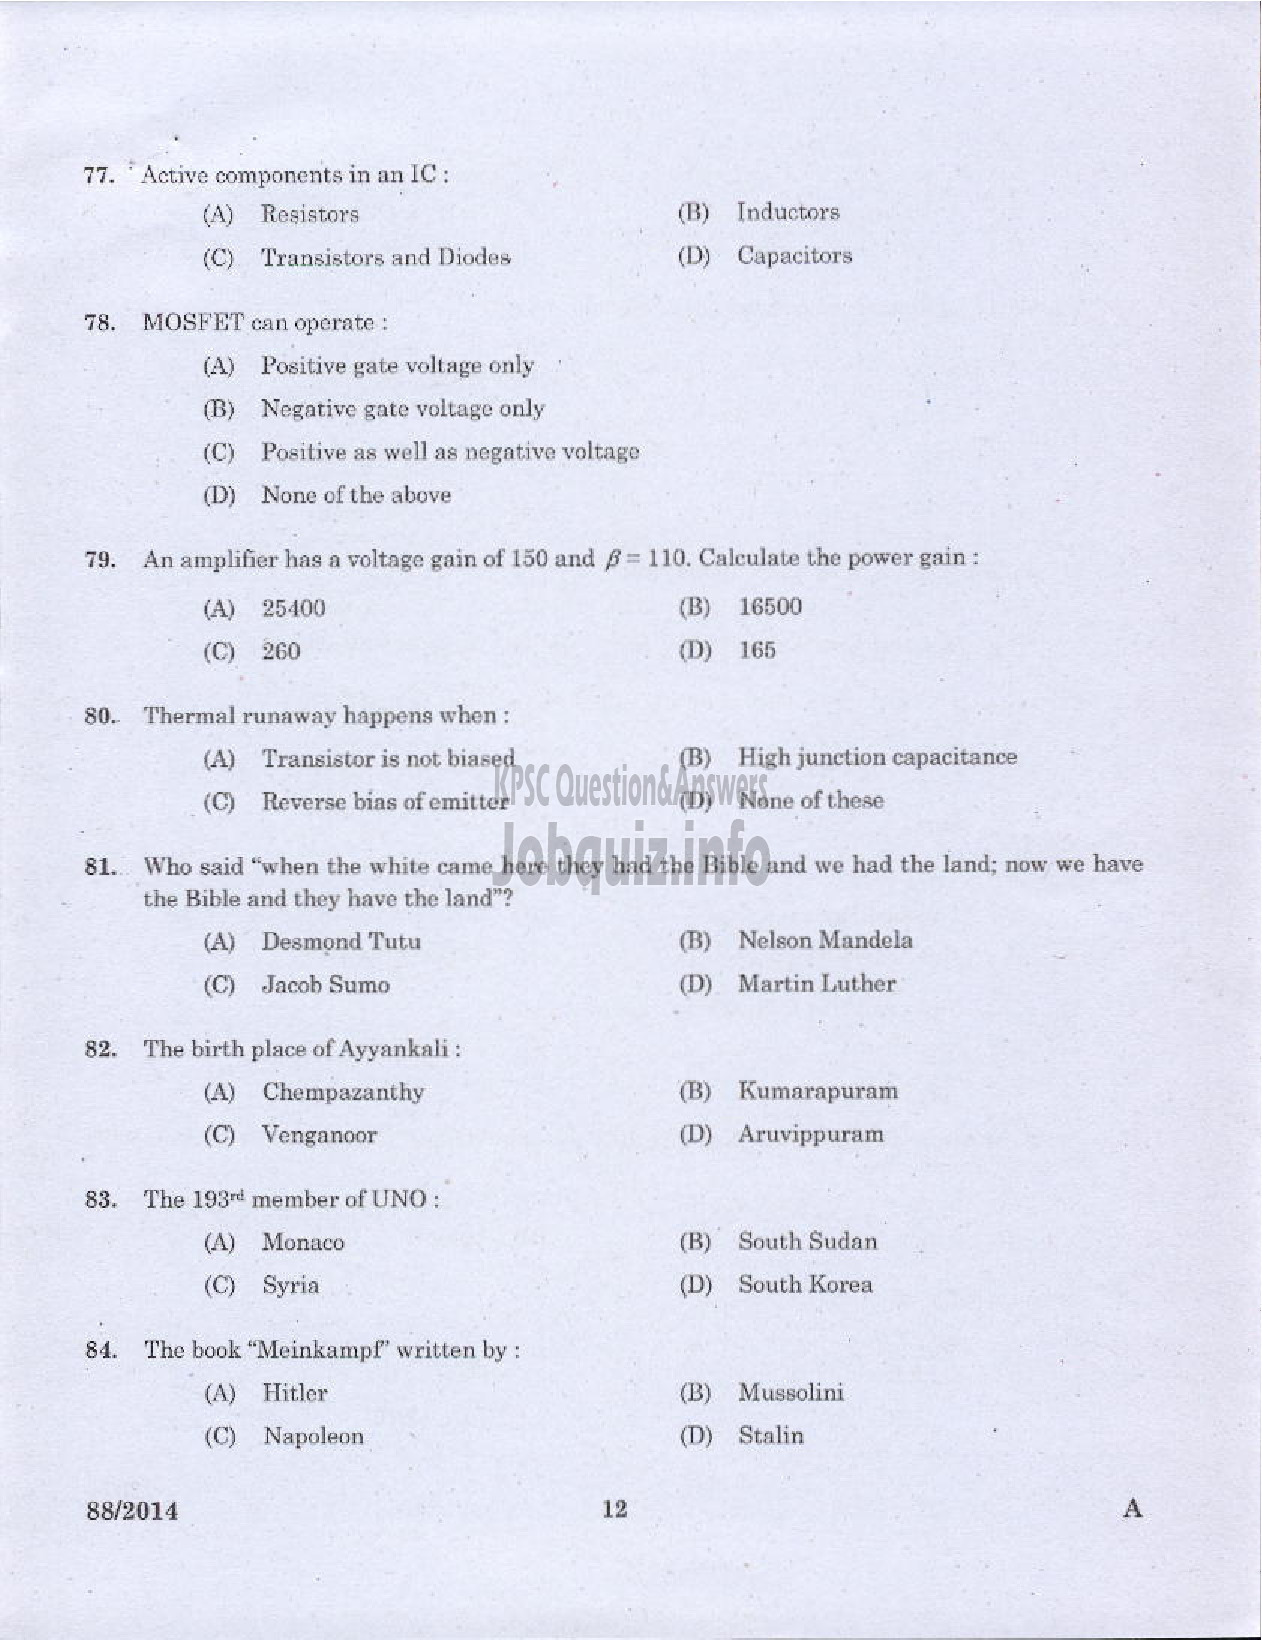 Kerala PSC Question Paper - JUNIOR INSTRUCTOR MECHANICAL CONSUMER ELECTRONICS INDUSTRIAL TRAINING DEPARTMENT-10